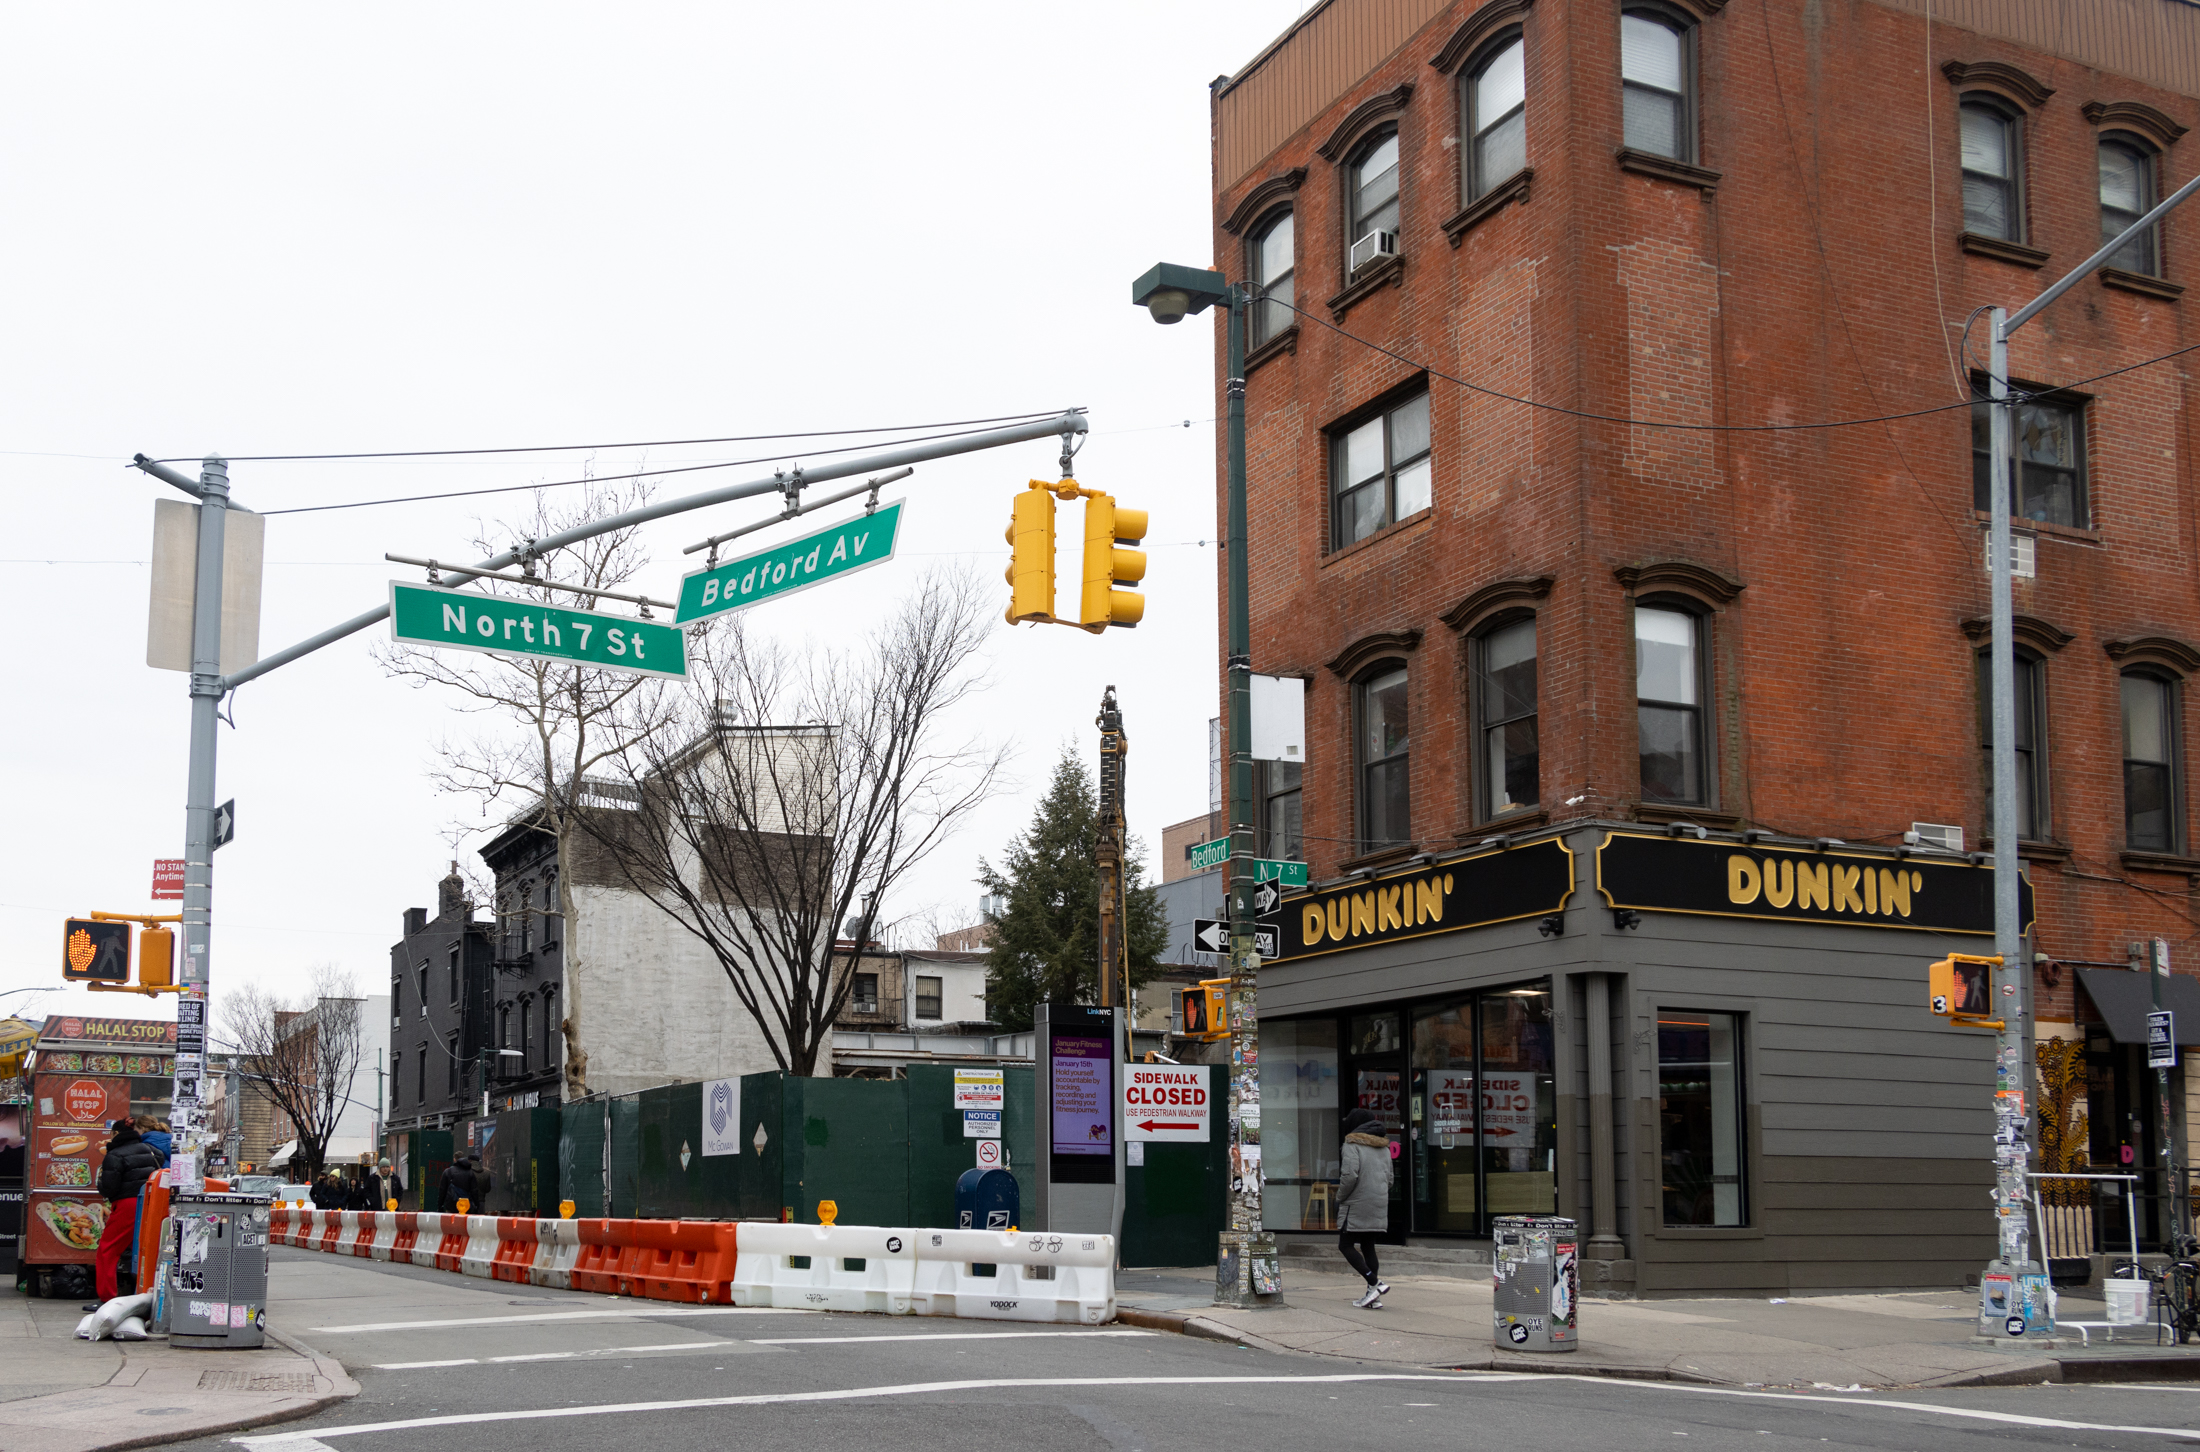 williamsburg - project site with buildings demolished